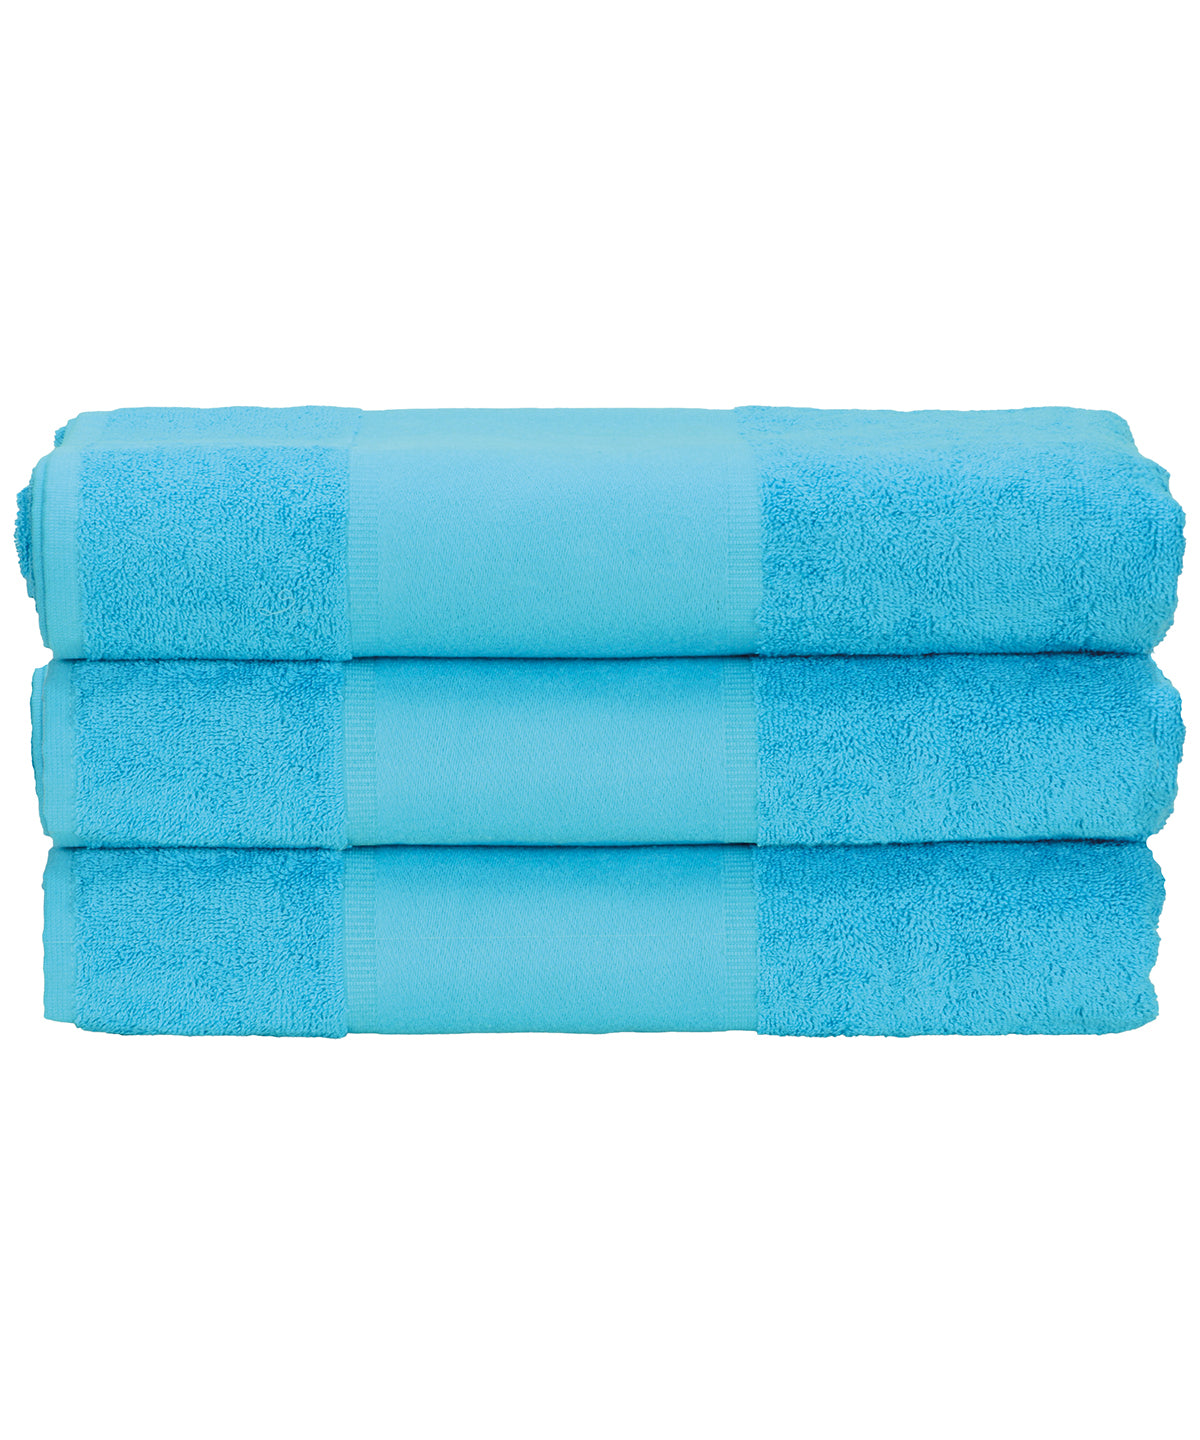 Personalised Towels - Turquoise A&R Towels ARTG® PRINT-Me® hand towel